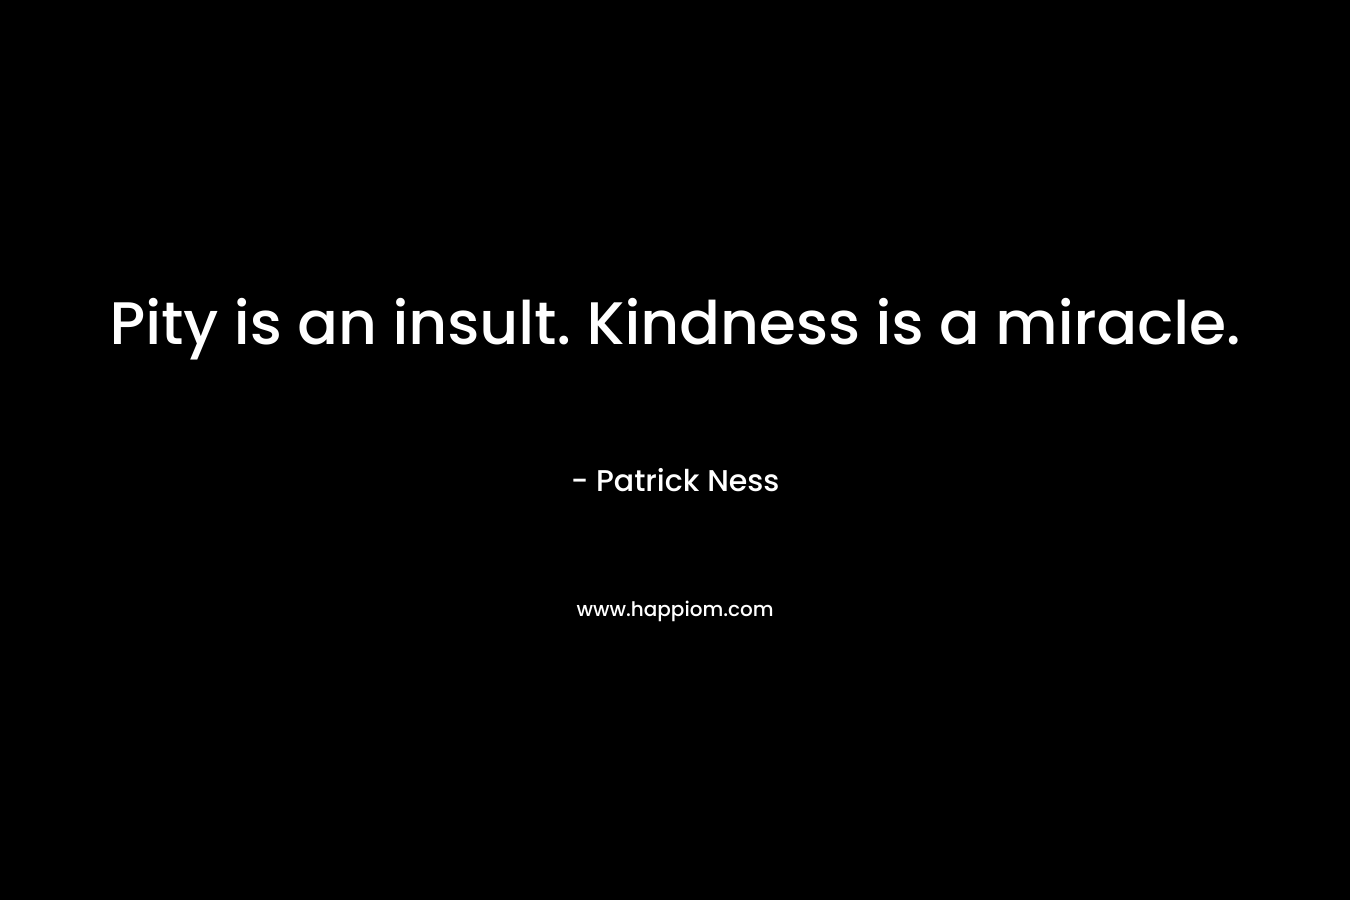 Pity is an insult. Kindness is a miracle.